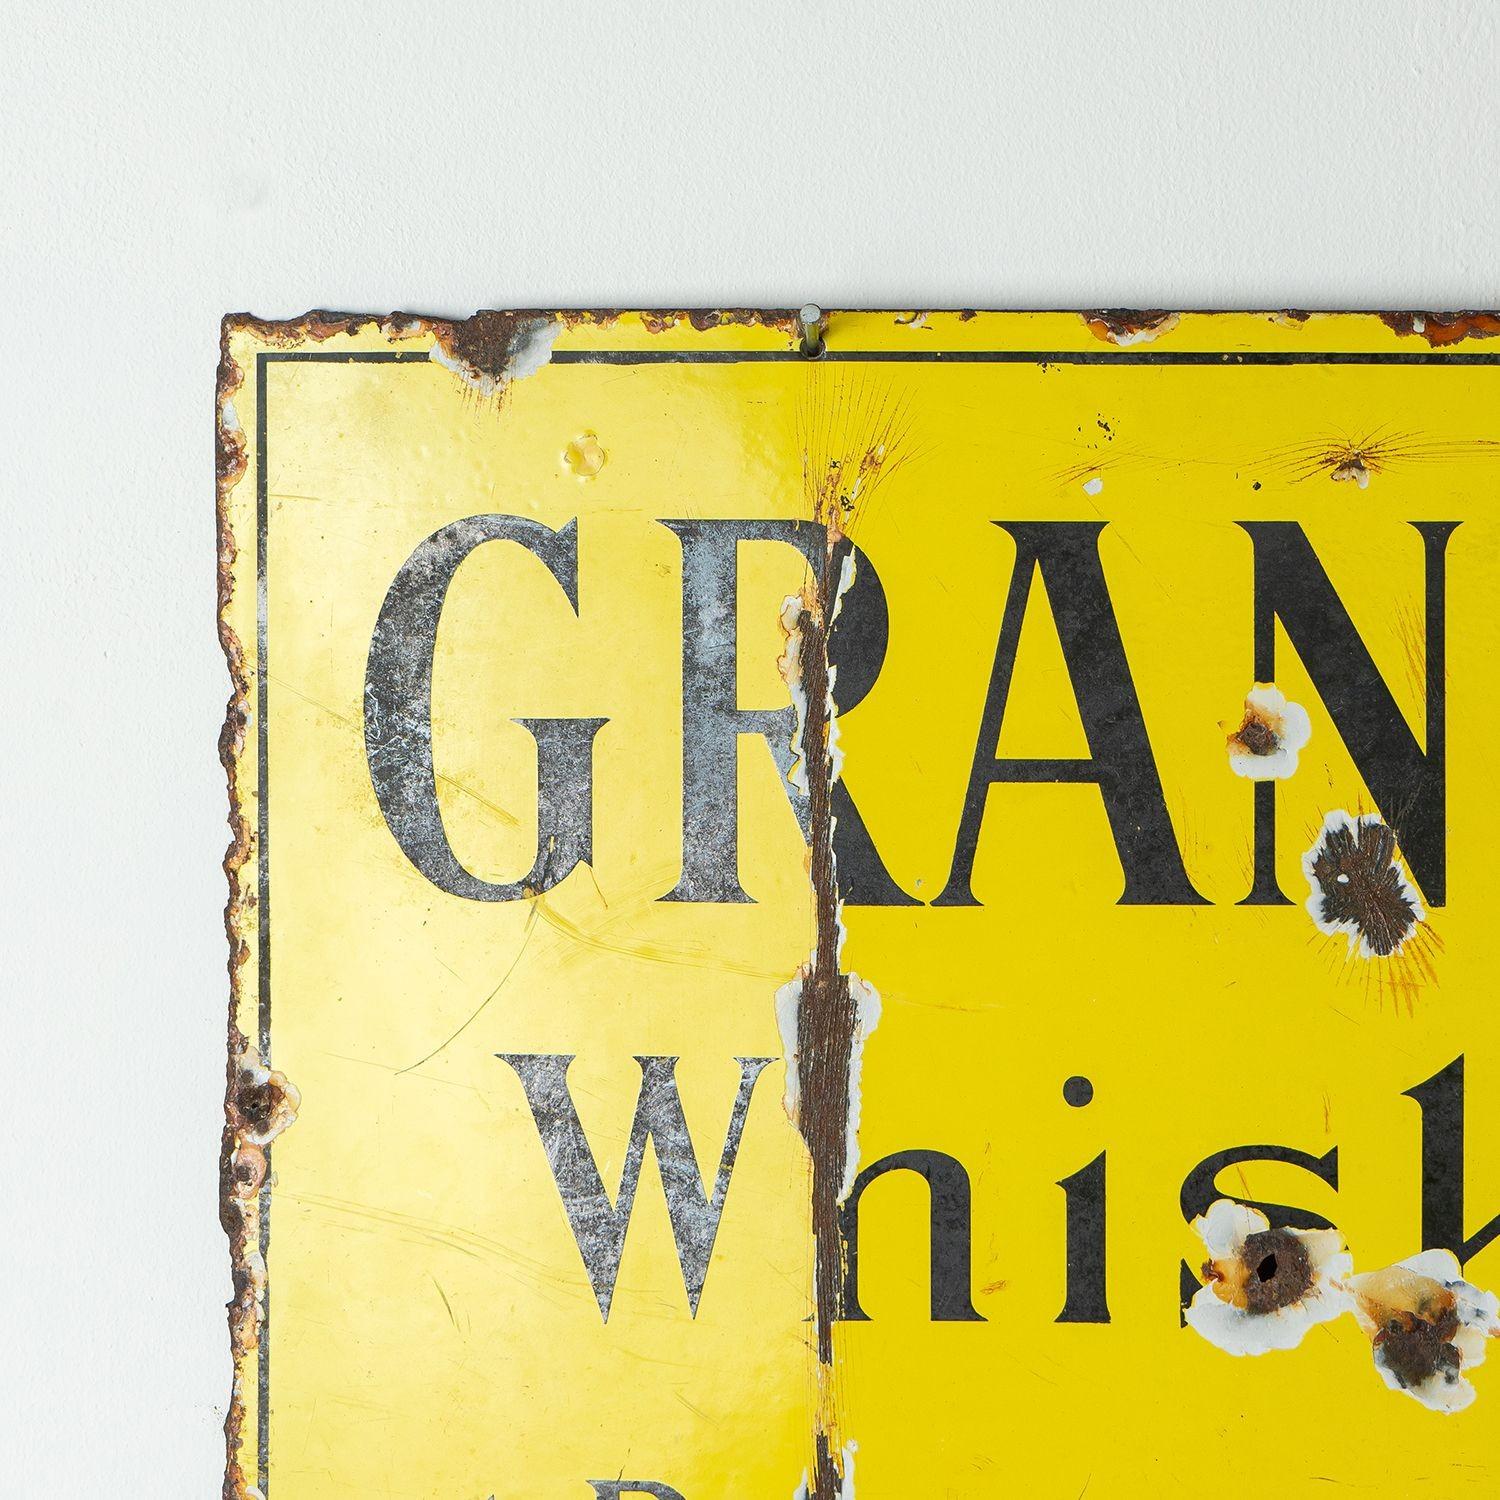 Enameled Vintage Grants Scotch Whisky Enamel Advertising Sign, Early 20th Century Whiskey For Sale